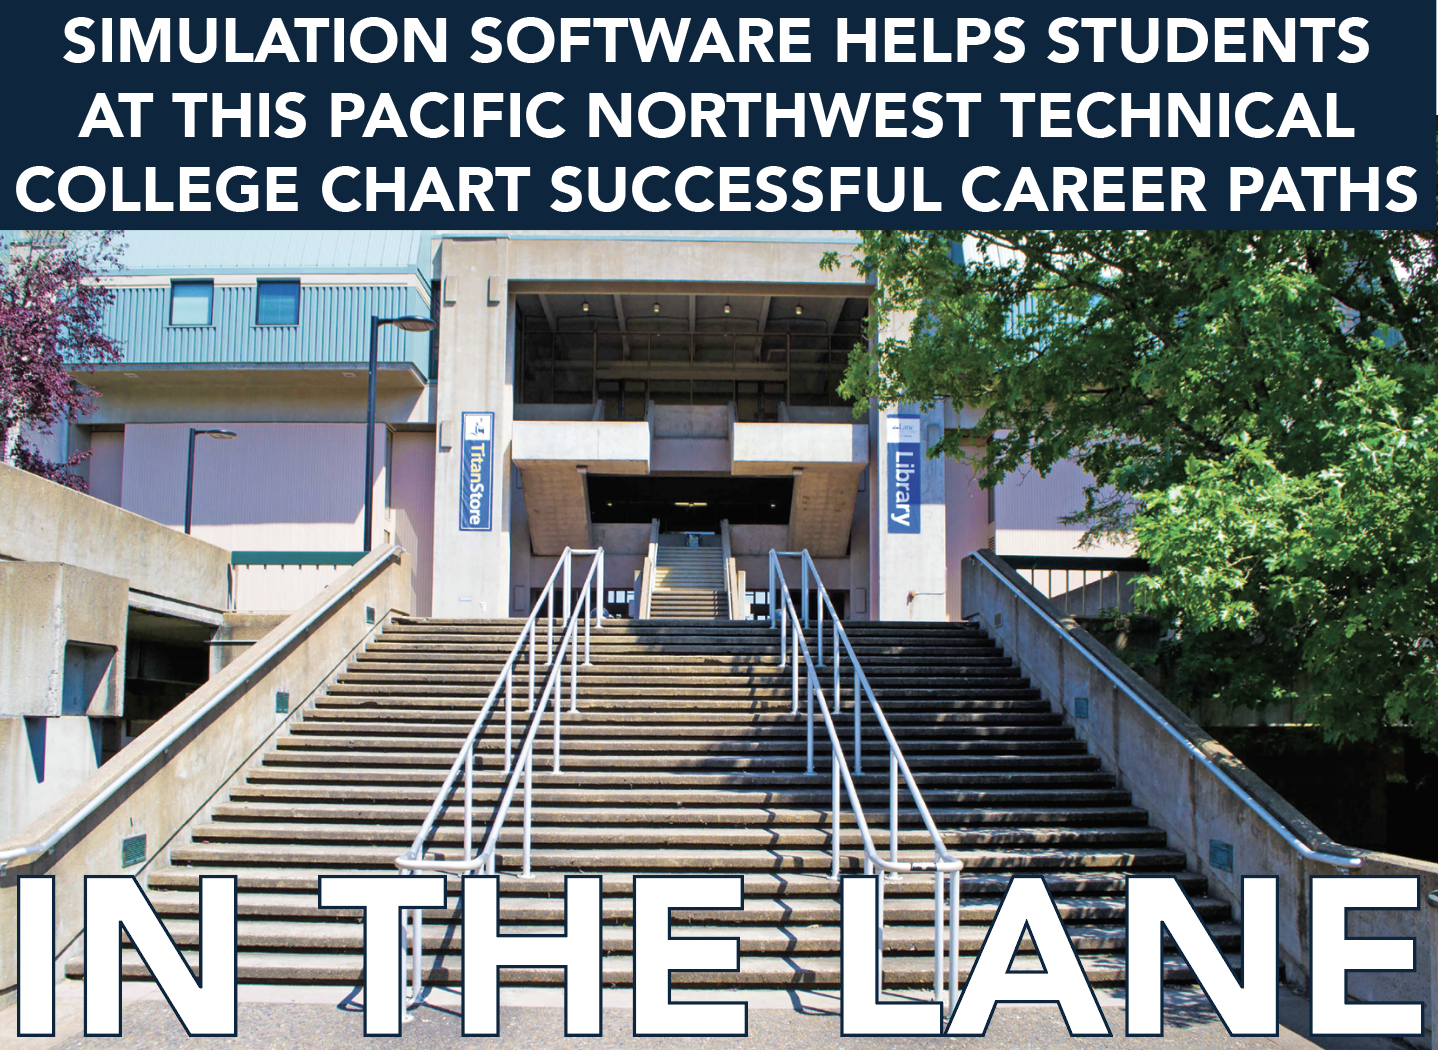 In The Lane – Simulation Software Helps Students at this Pacific Northwest Technical College Chart Successful Career Paths